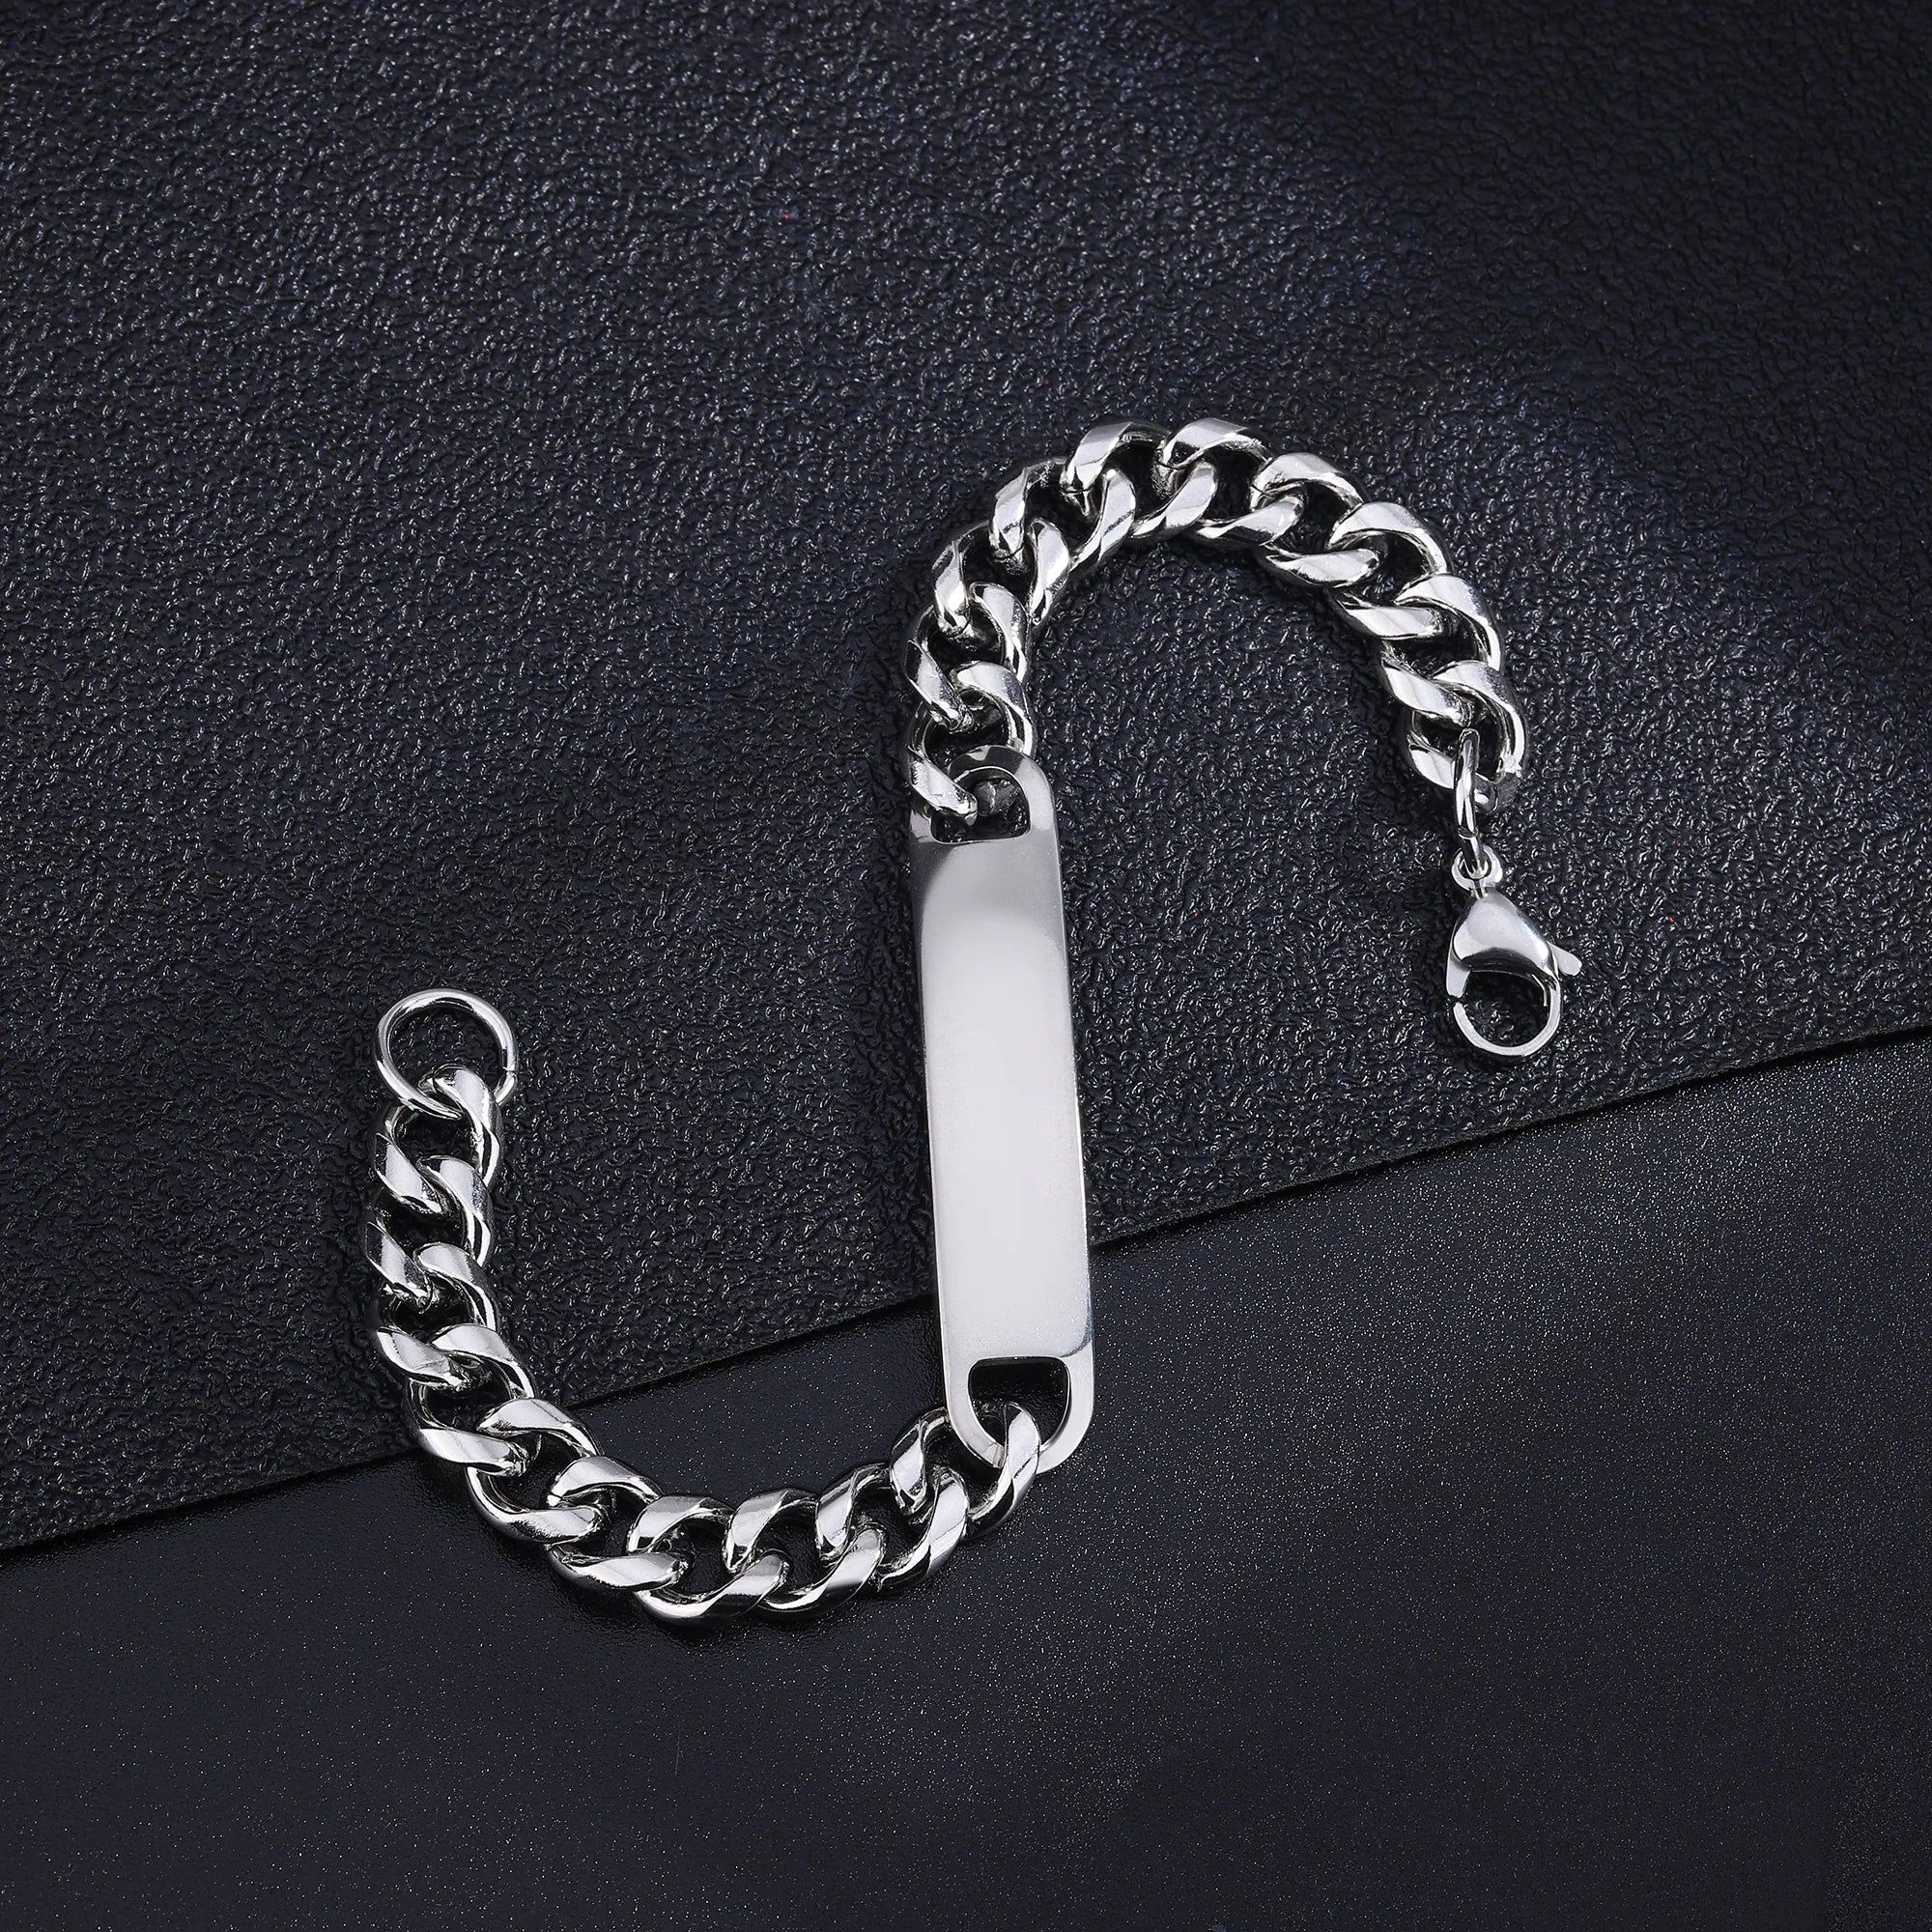 Personalized Stainless Steel Silver Bracelet